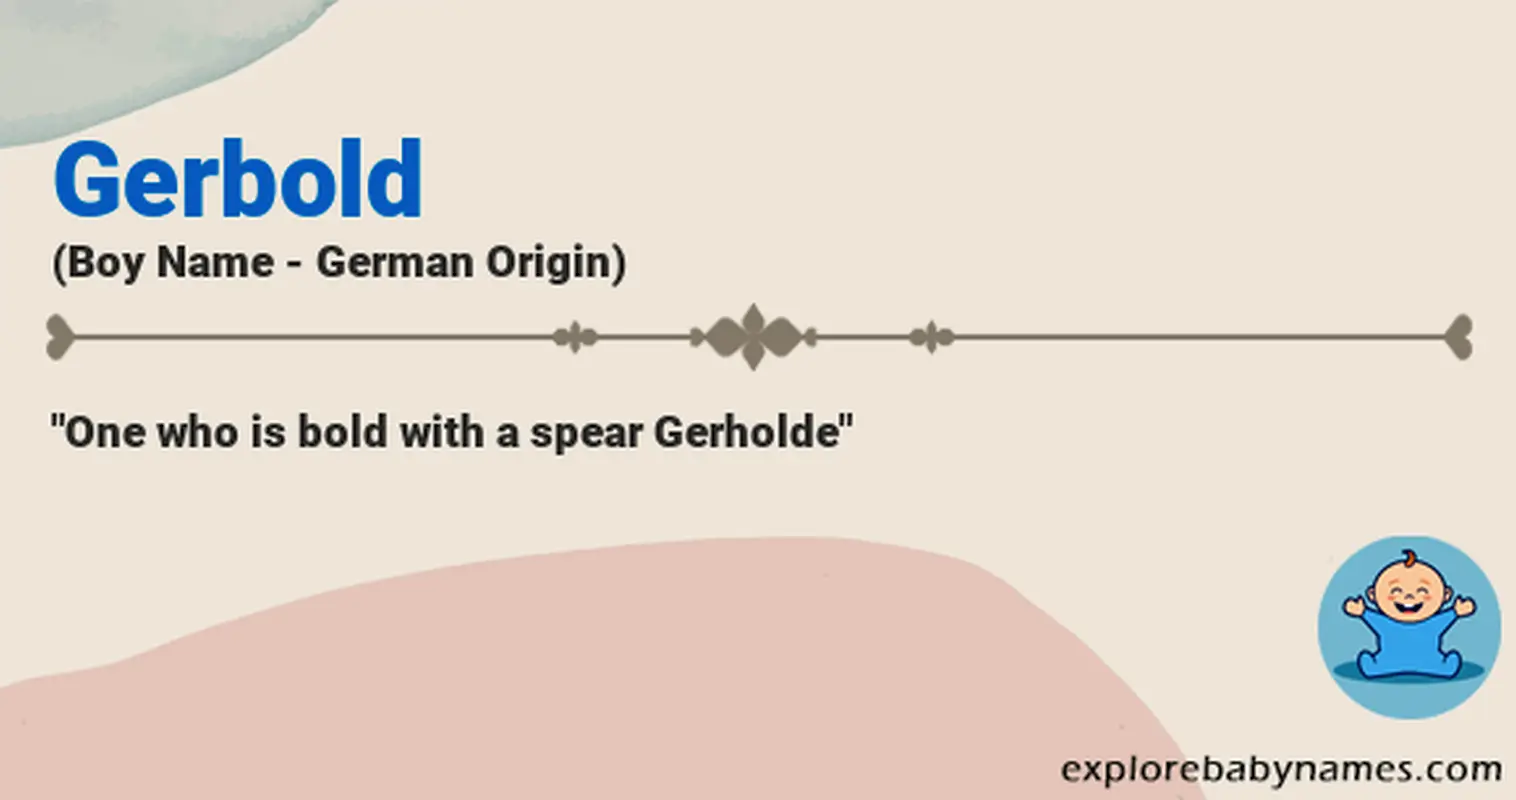 Meaning of Gerbold